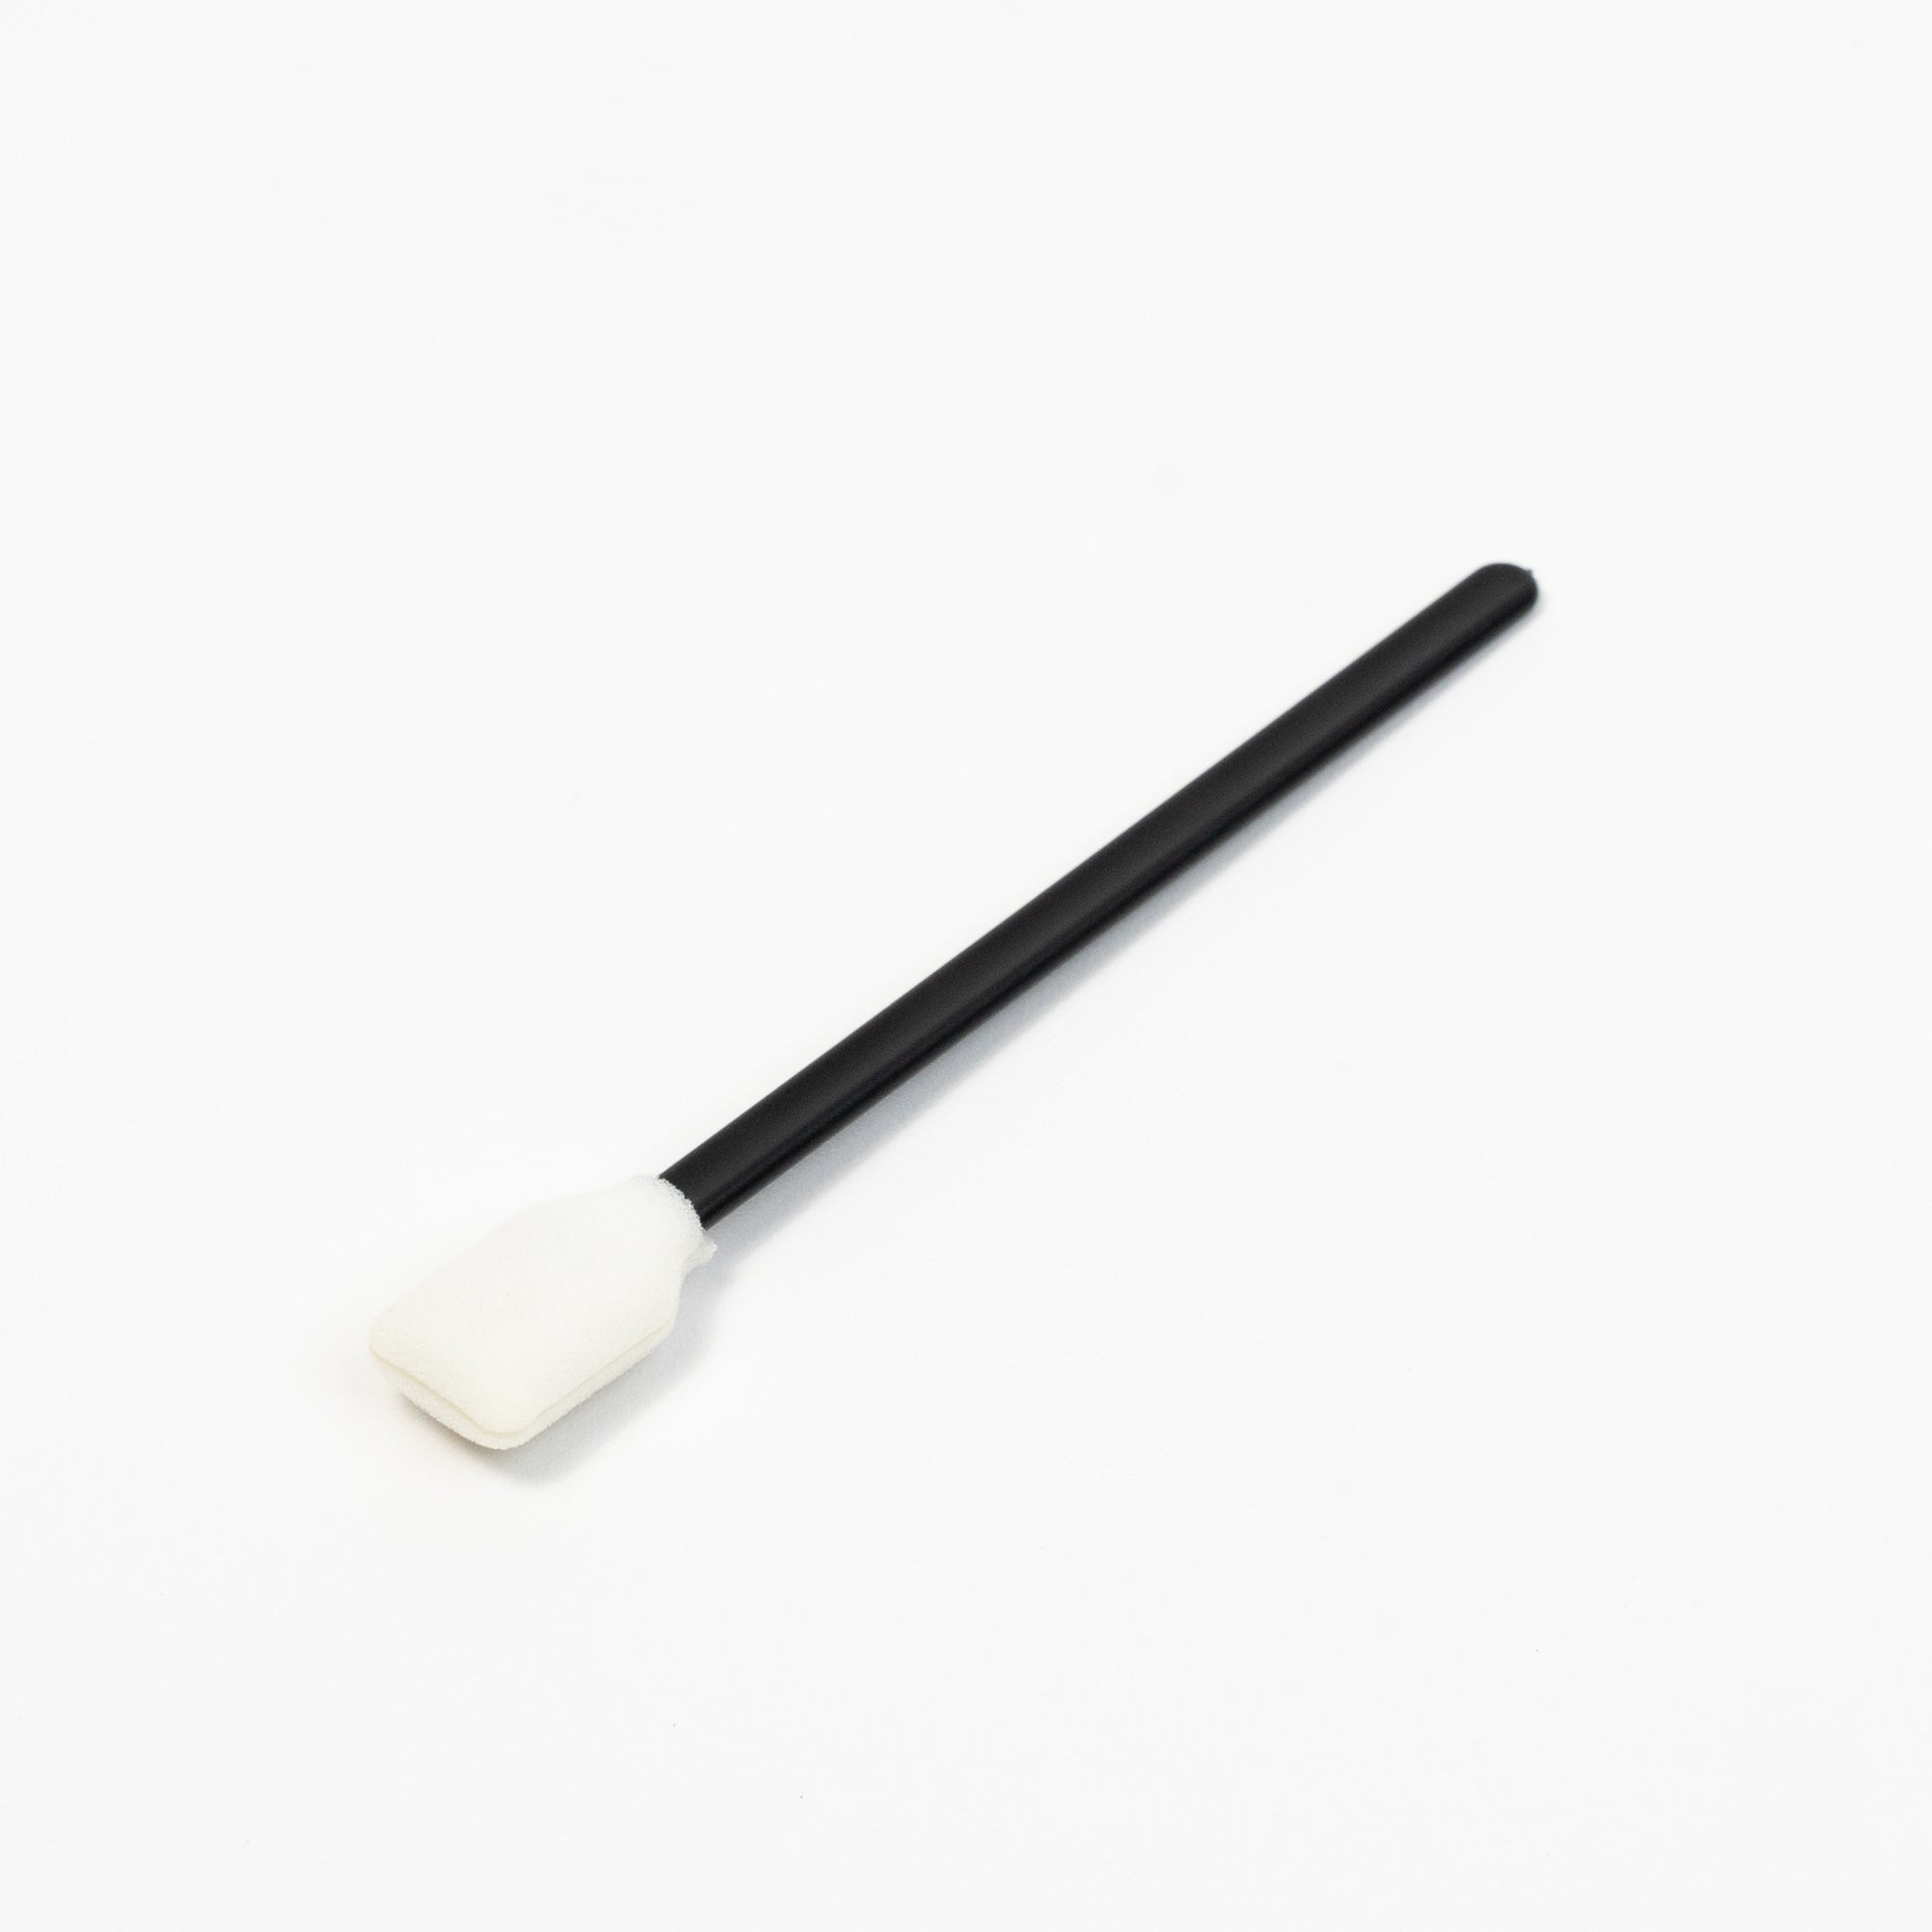 Pack of black sponge applicators for precise and flawless makeup application